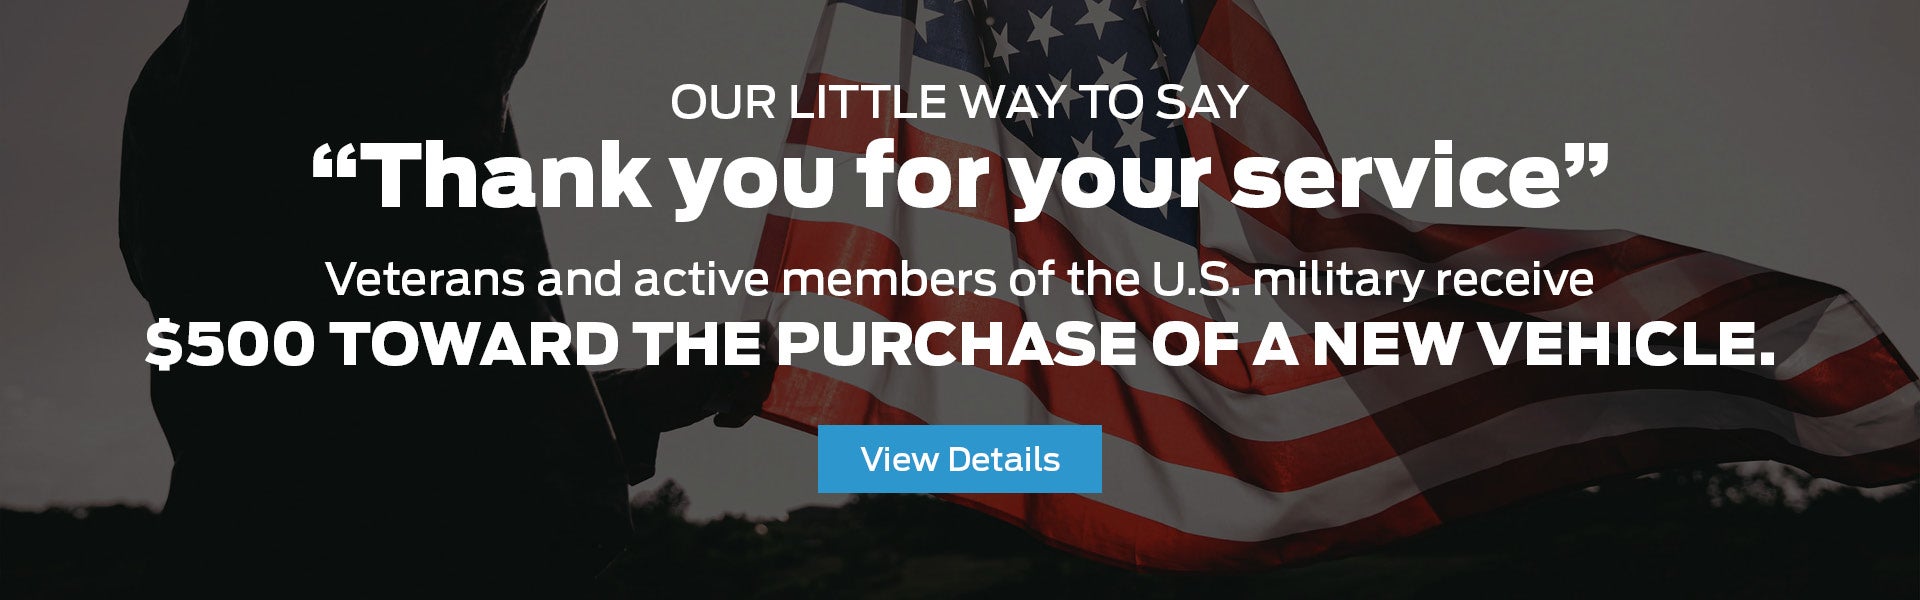 Veterans and active members of the U.S. military receive $50